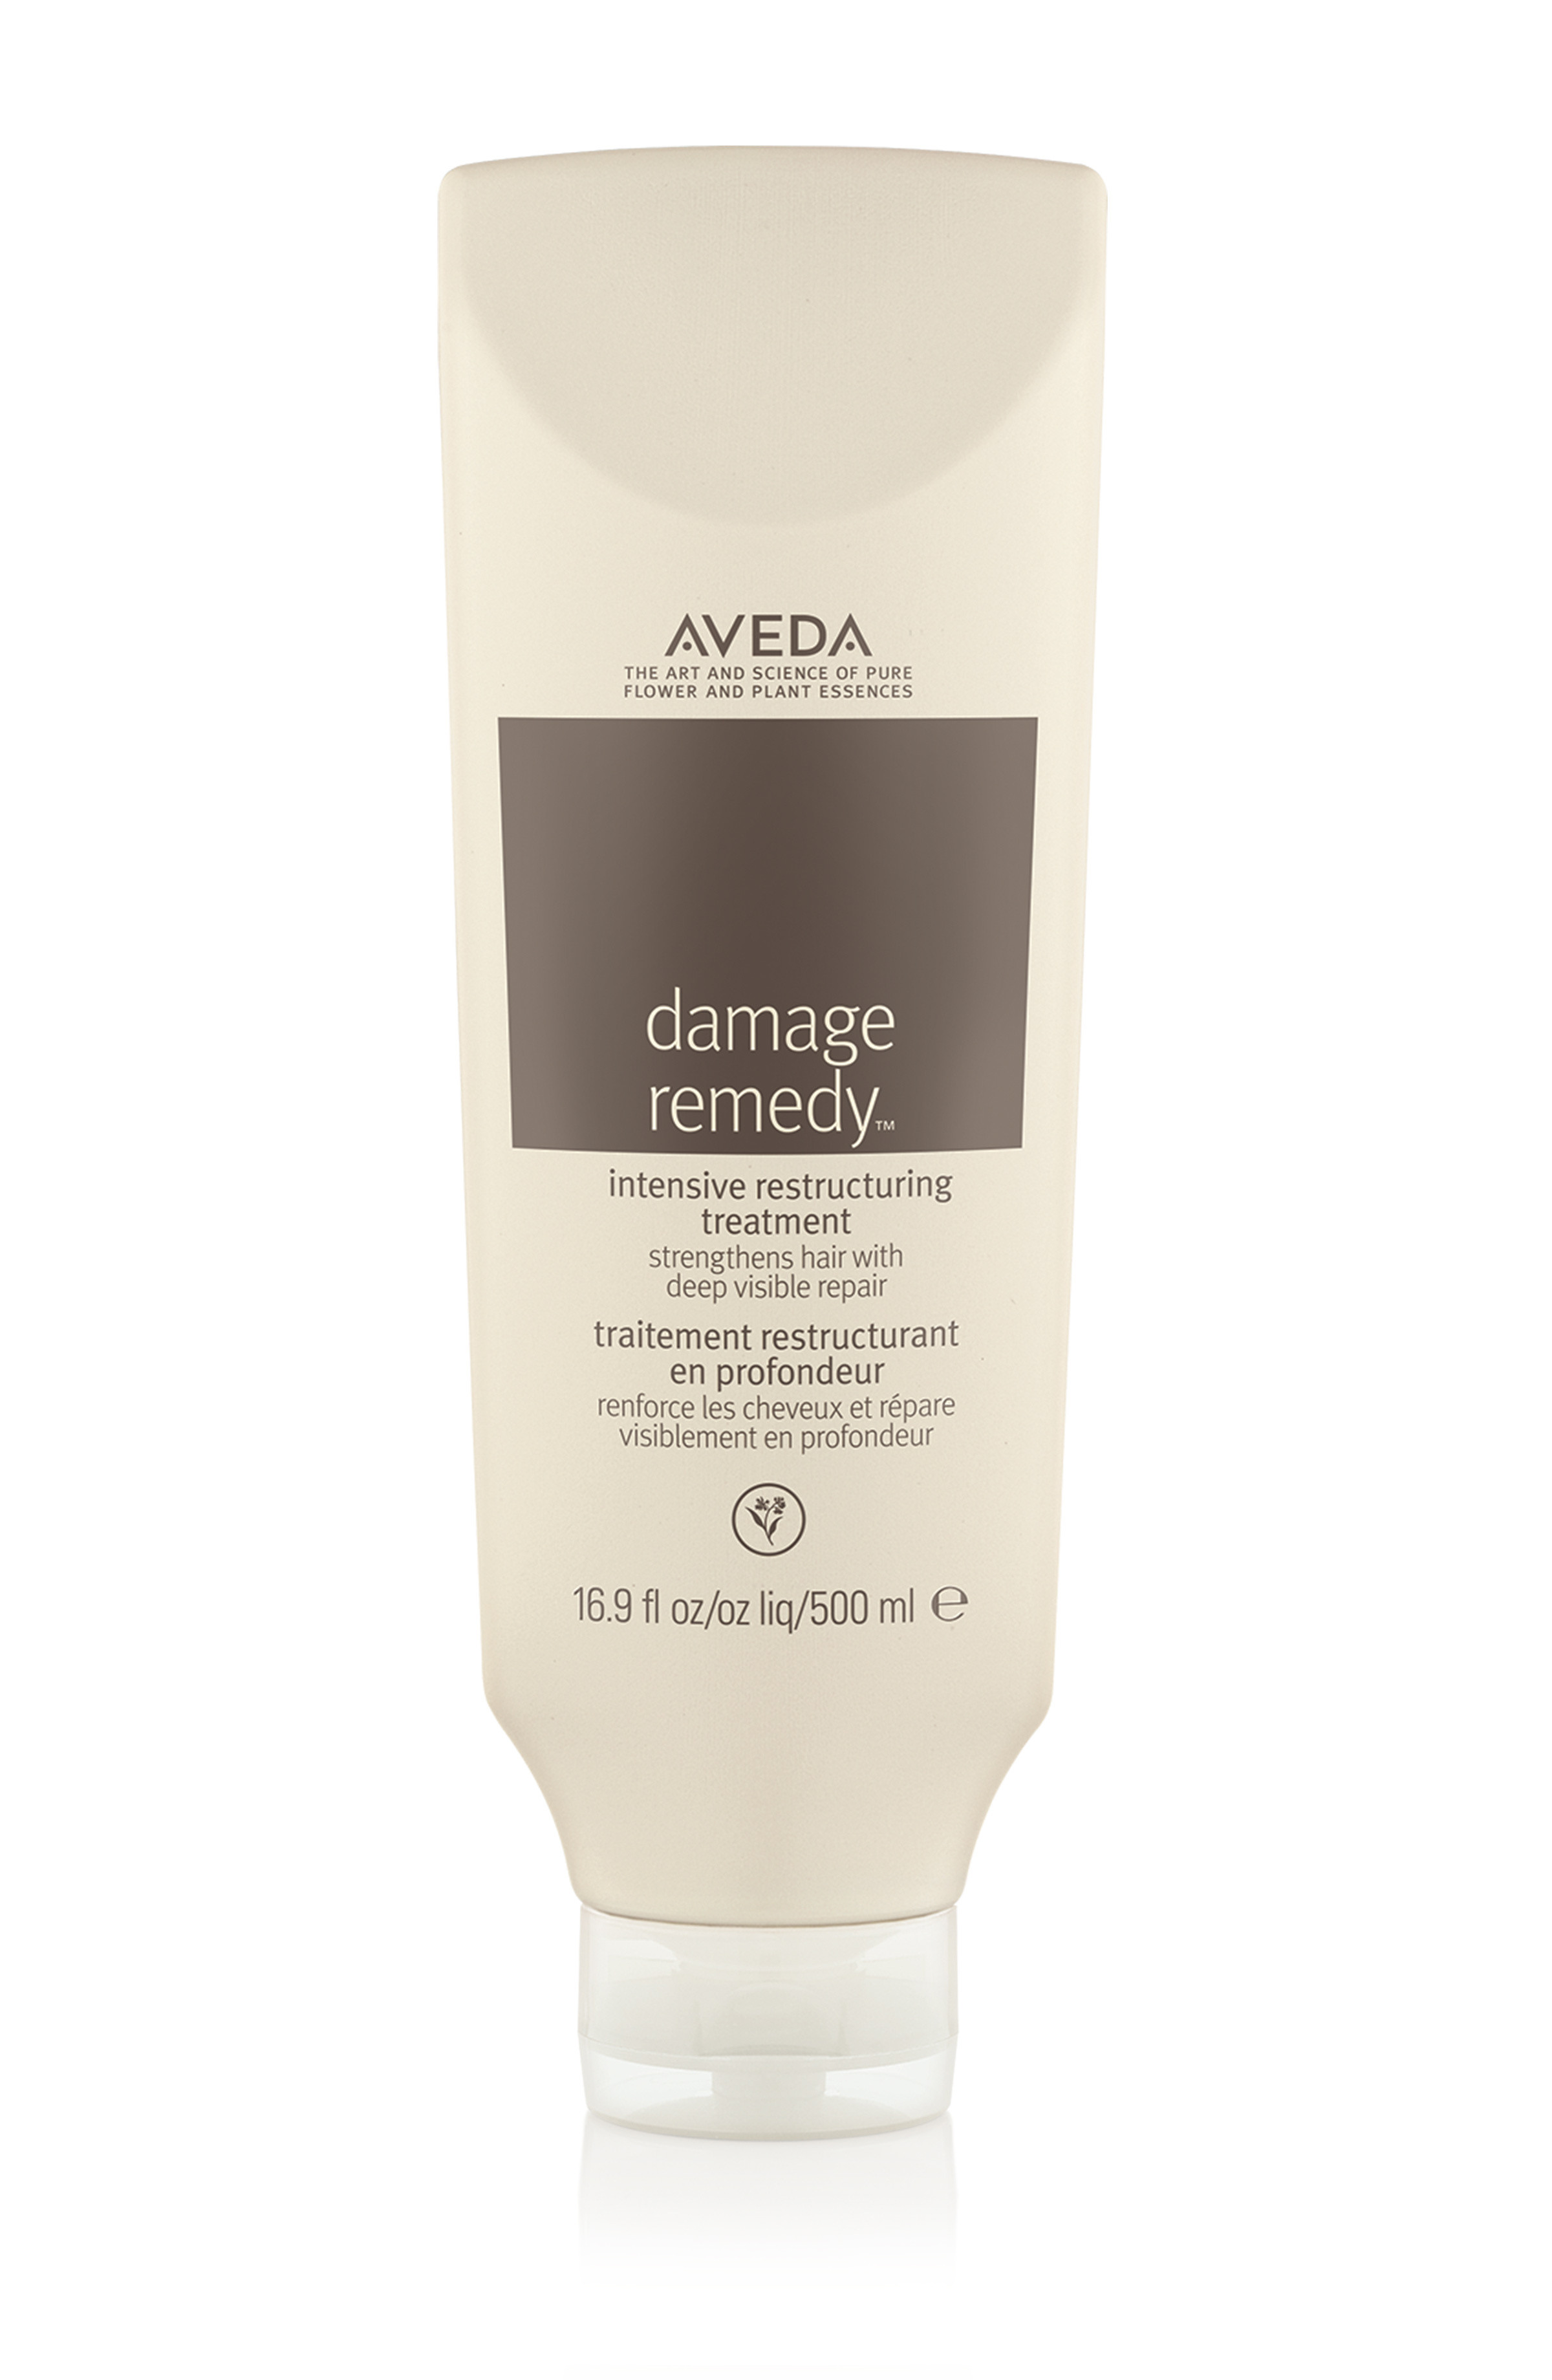 Aveda damage remedy treatment 500 ml, White / Brown, large image number 0